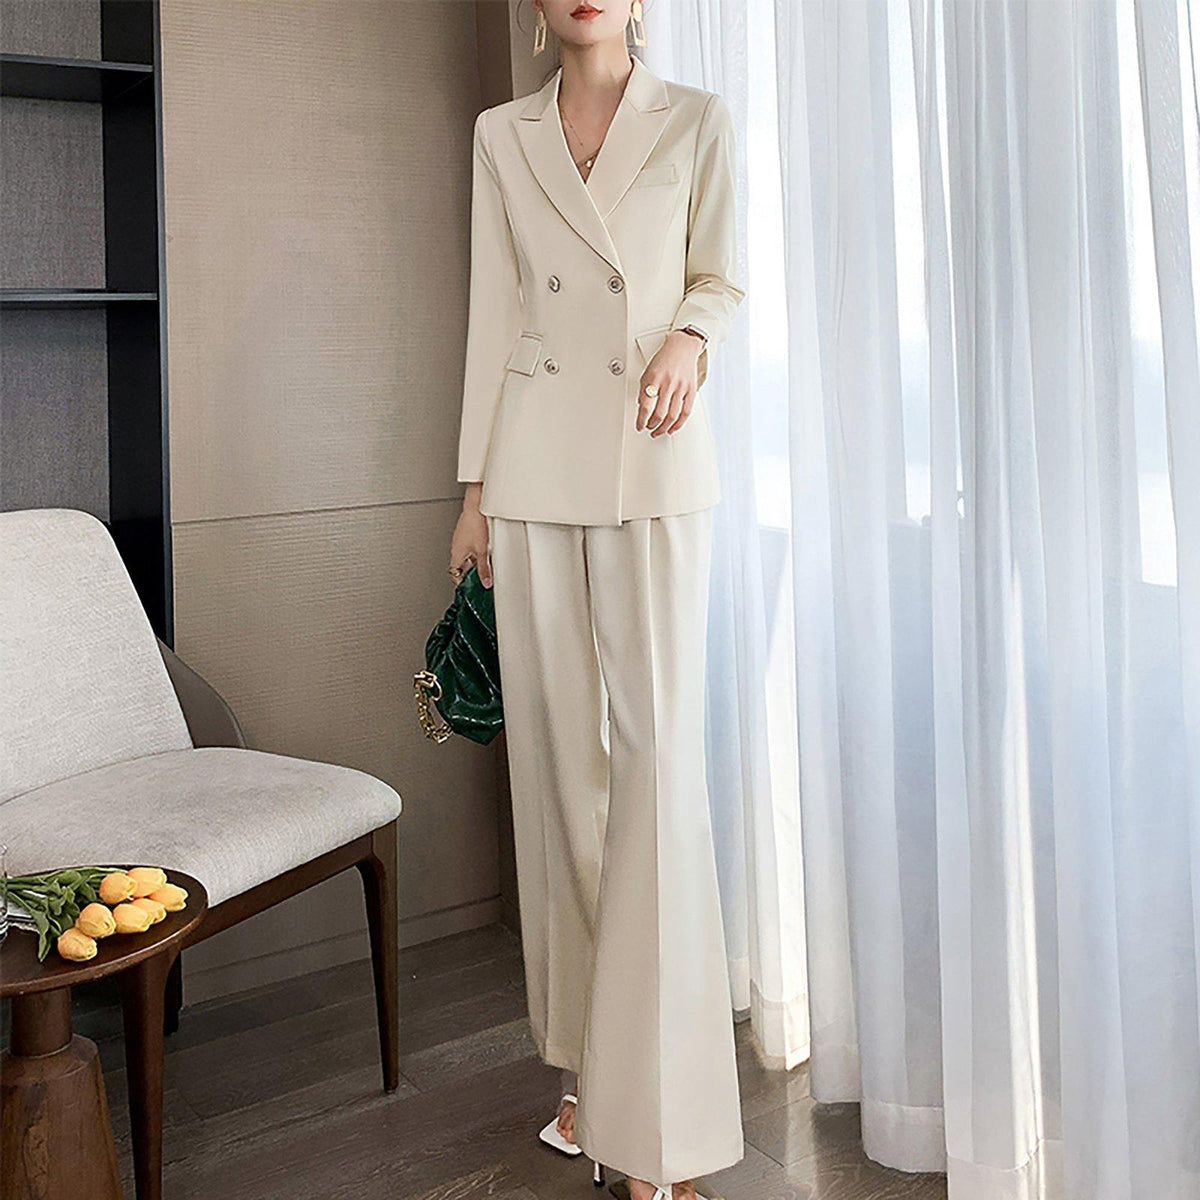 fvwitlyh Interview Outfit Women's Fashion Autumn Winter New Suit Coat  Casual Wide Leg Pants Suit Set Fitted Clothes for Women 